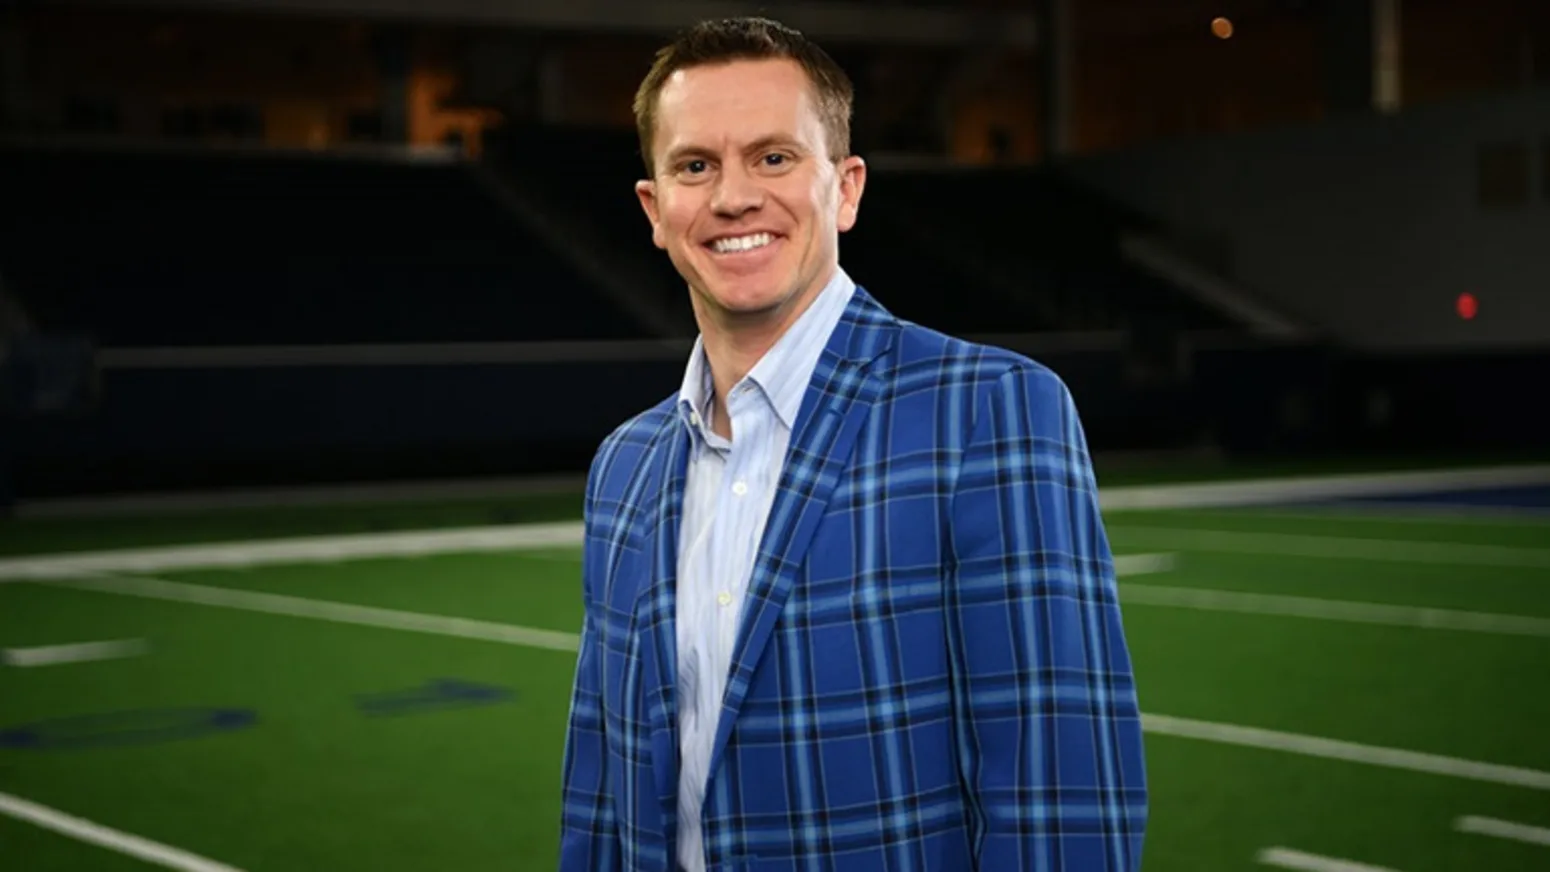 SPORTSBUSINESS JOURNAL: ERIC SUDOL NAMED FORTY UNDER 40, CLASS OF 2019